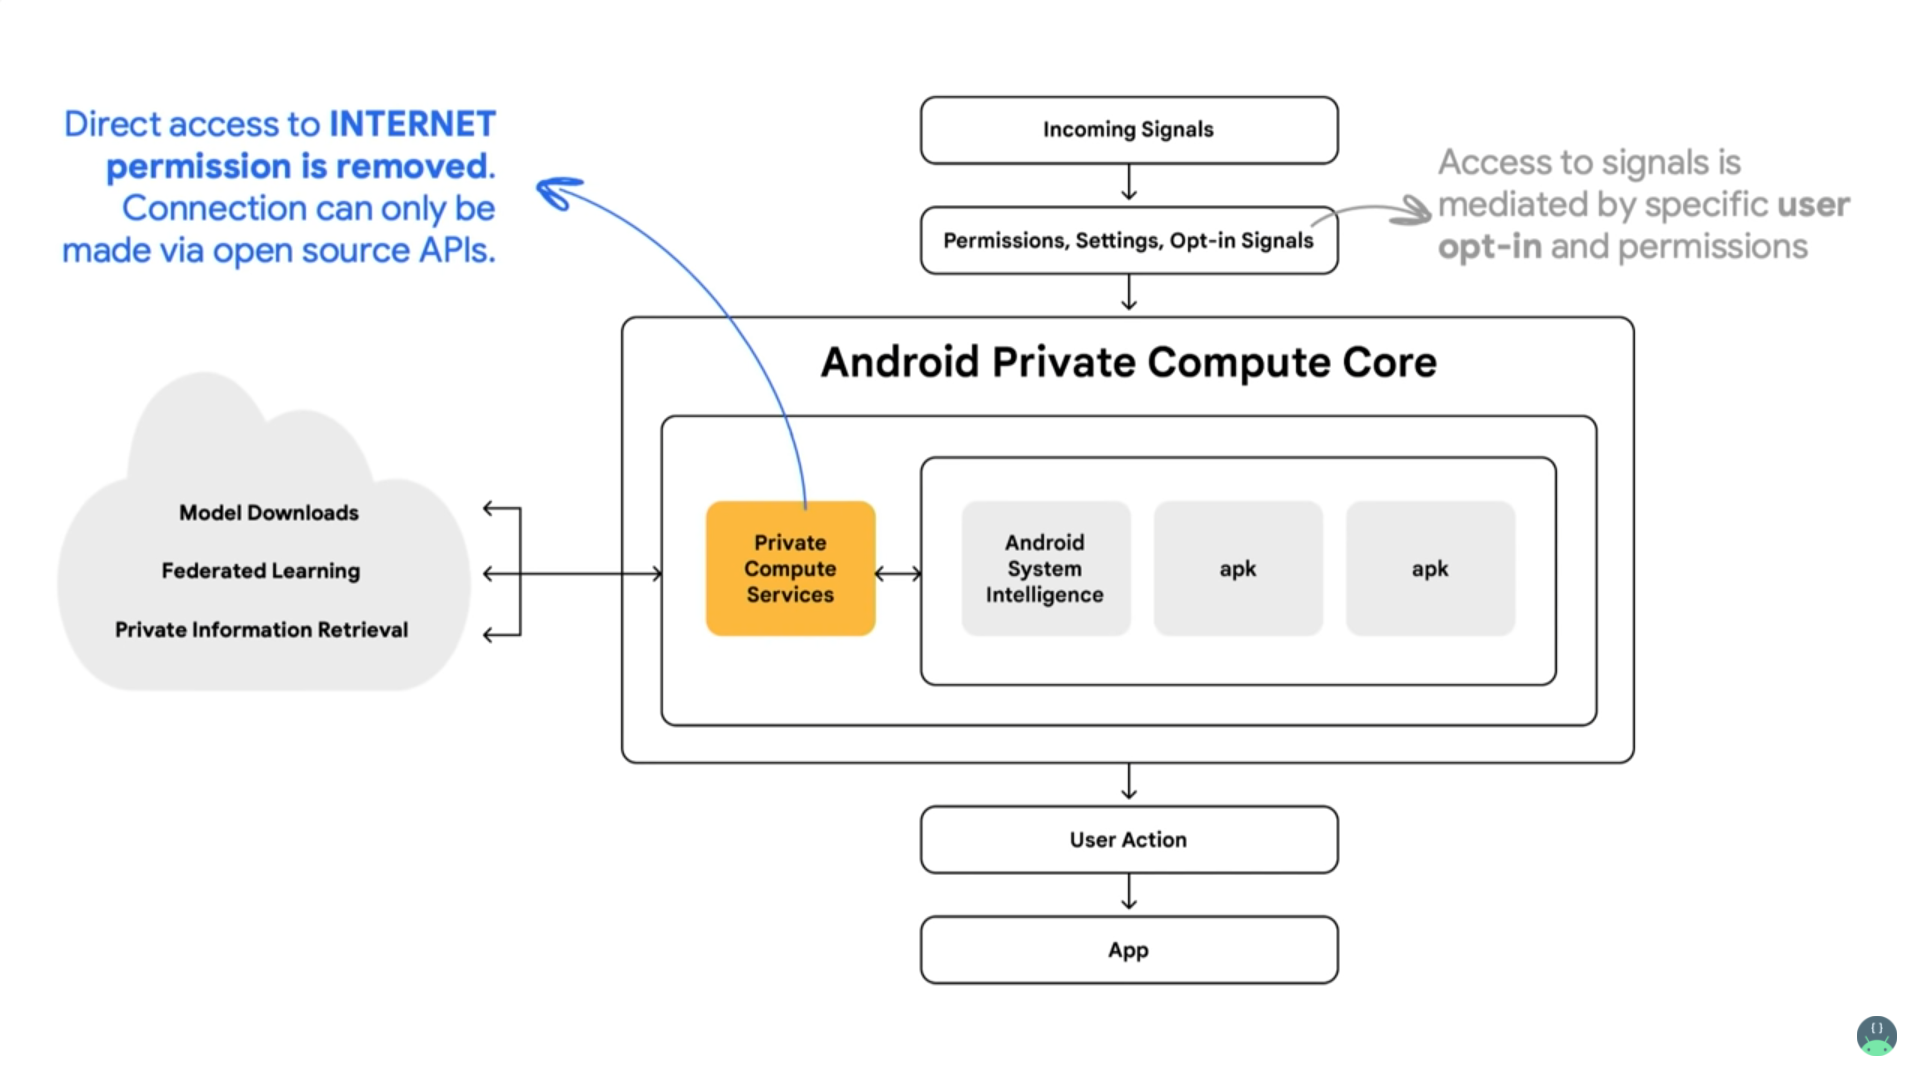 How Google's Private Compute Core Protects User Privacy in Android Devices Using AI/ML Algorithms